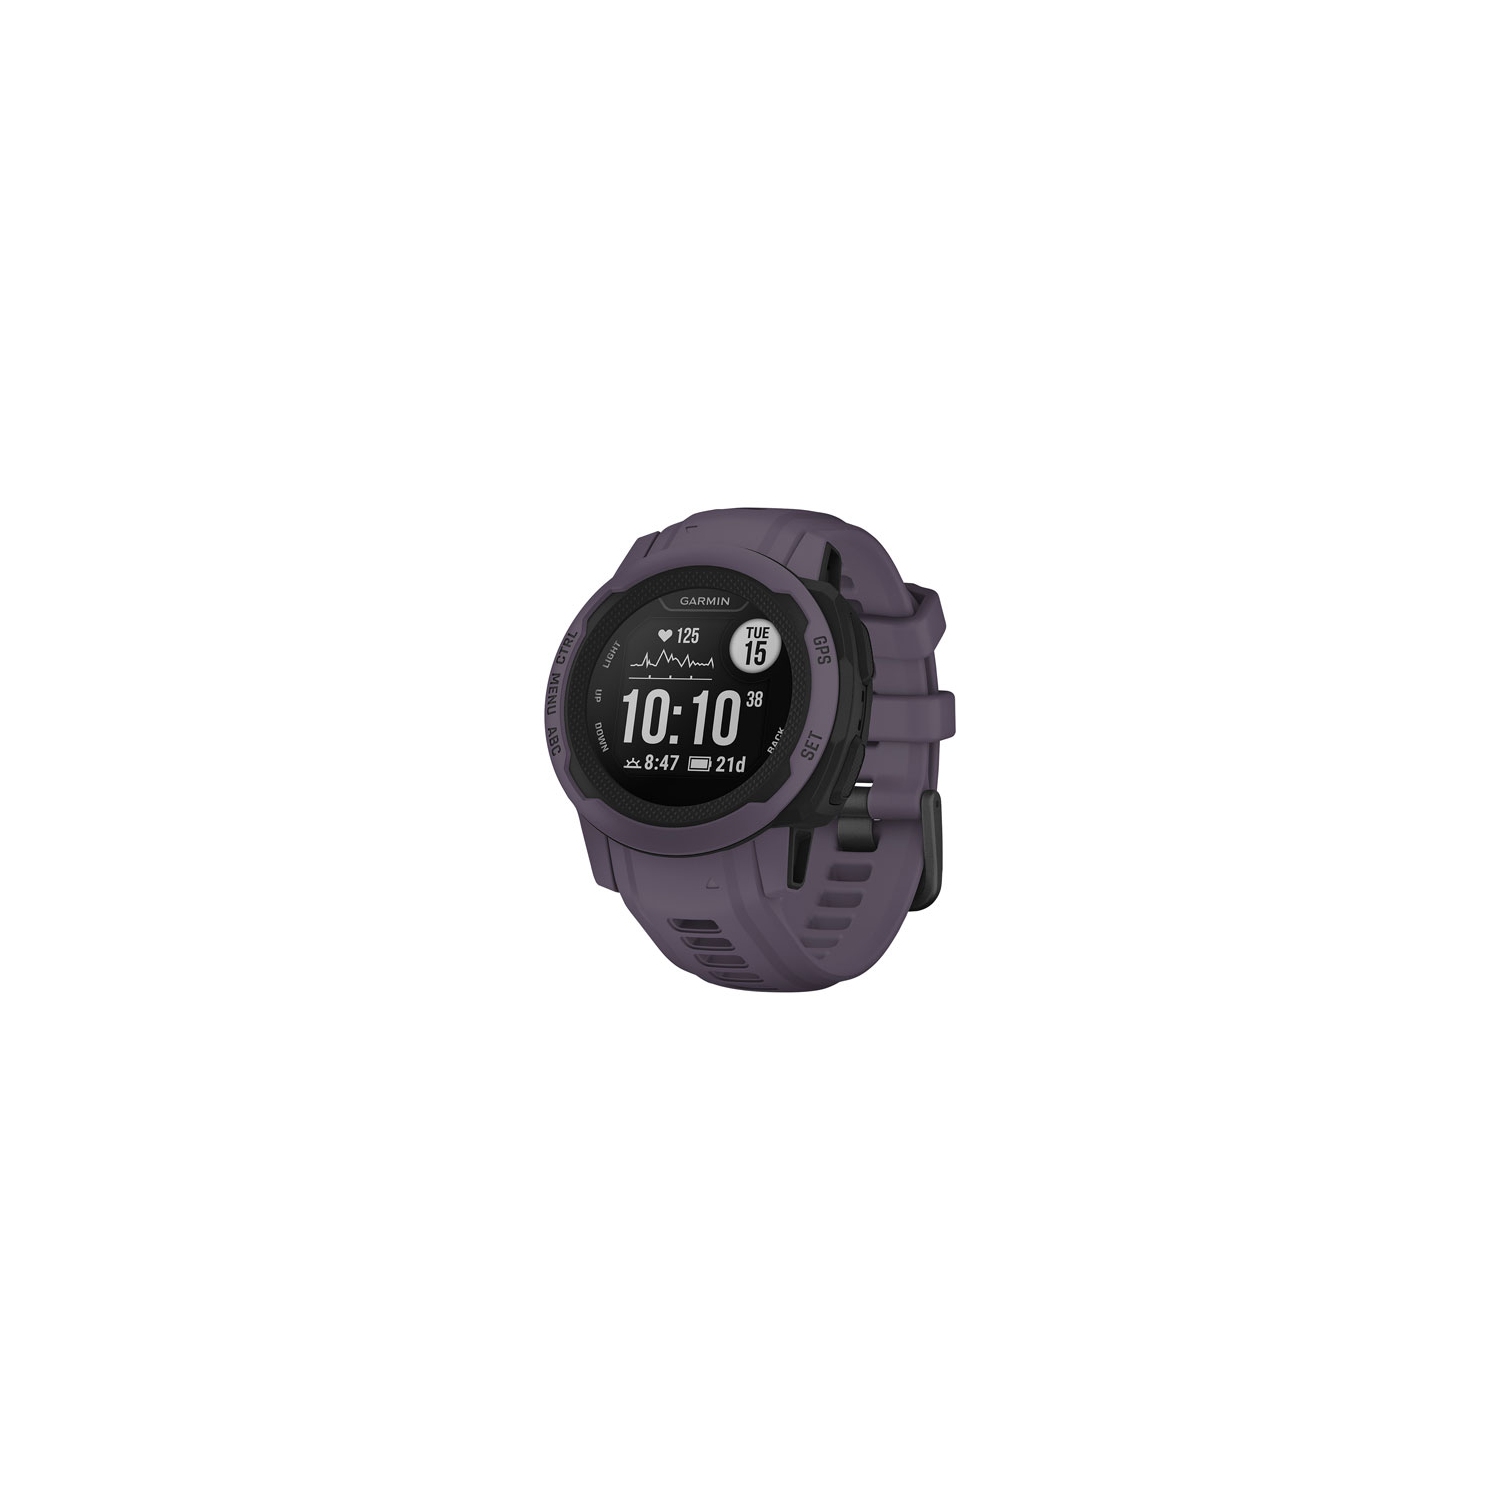 Garmin Instinct 2S GPS Watch with Heart Rate Monitor - Deep Orchid